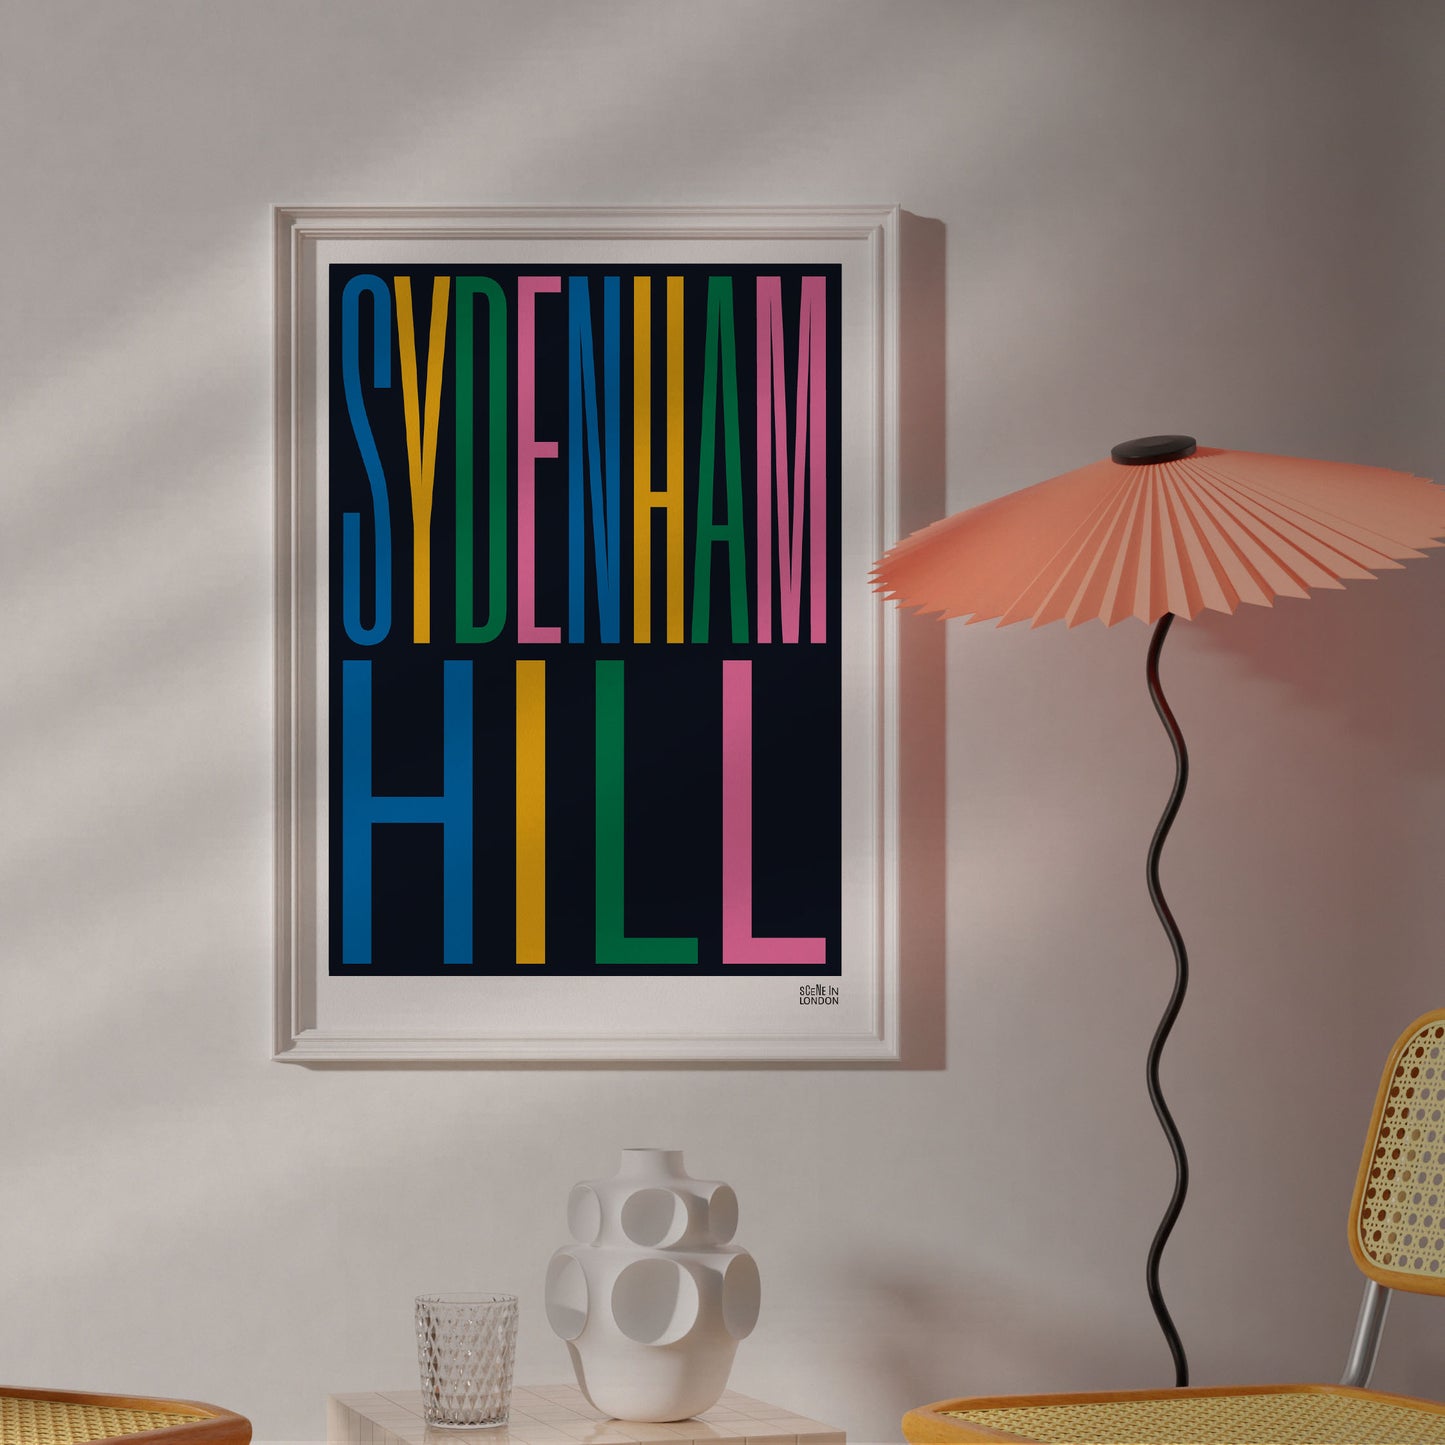 Sydenham Hill Poster Print with places in Sydenham London